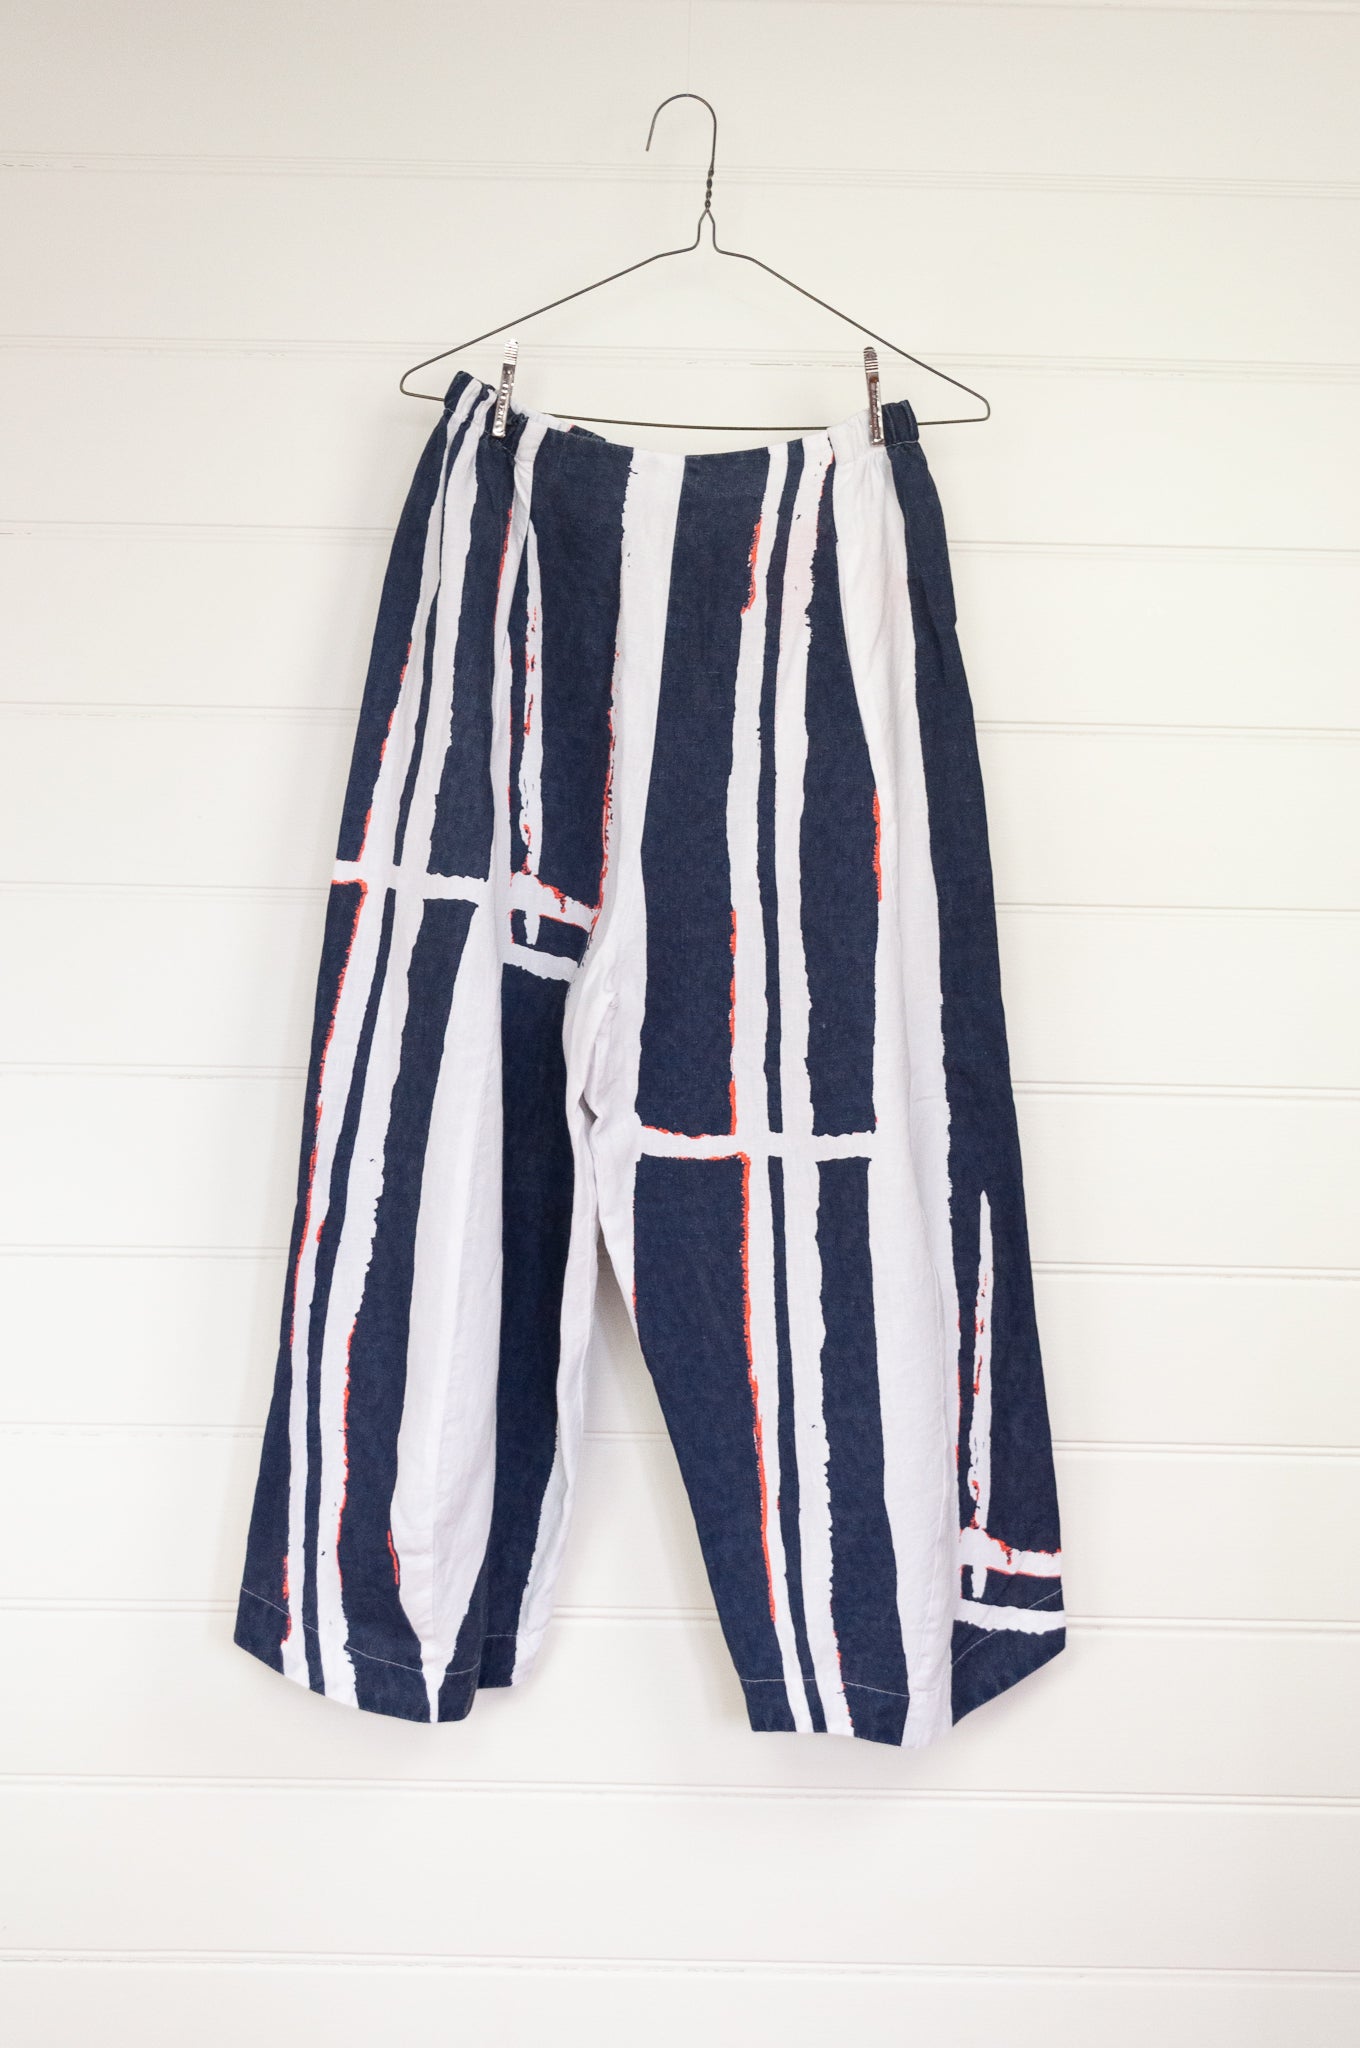 Banana Blue bold stripe blue and white linen pants, with a dash of neon orange.